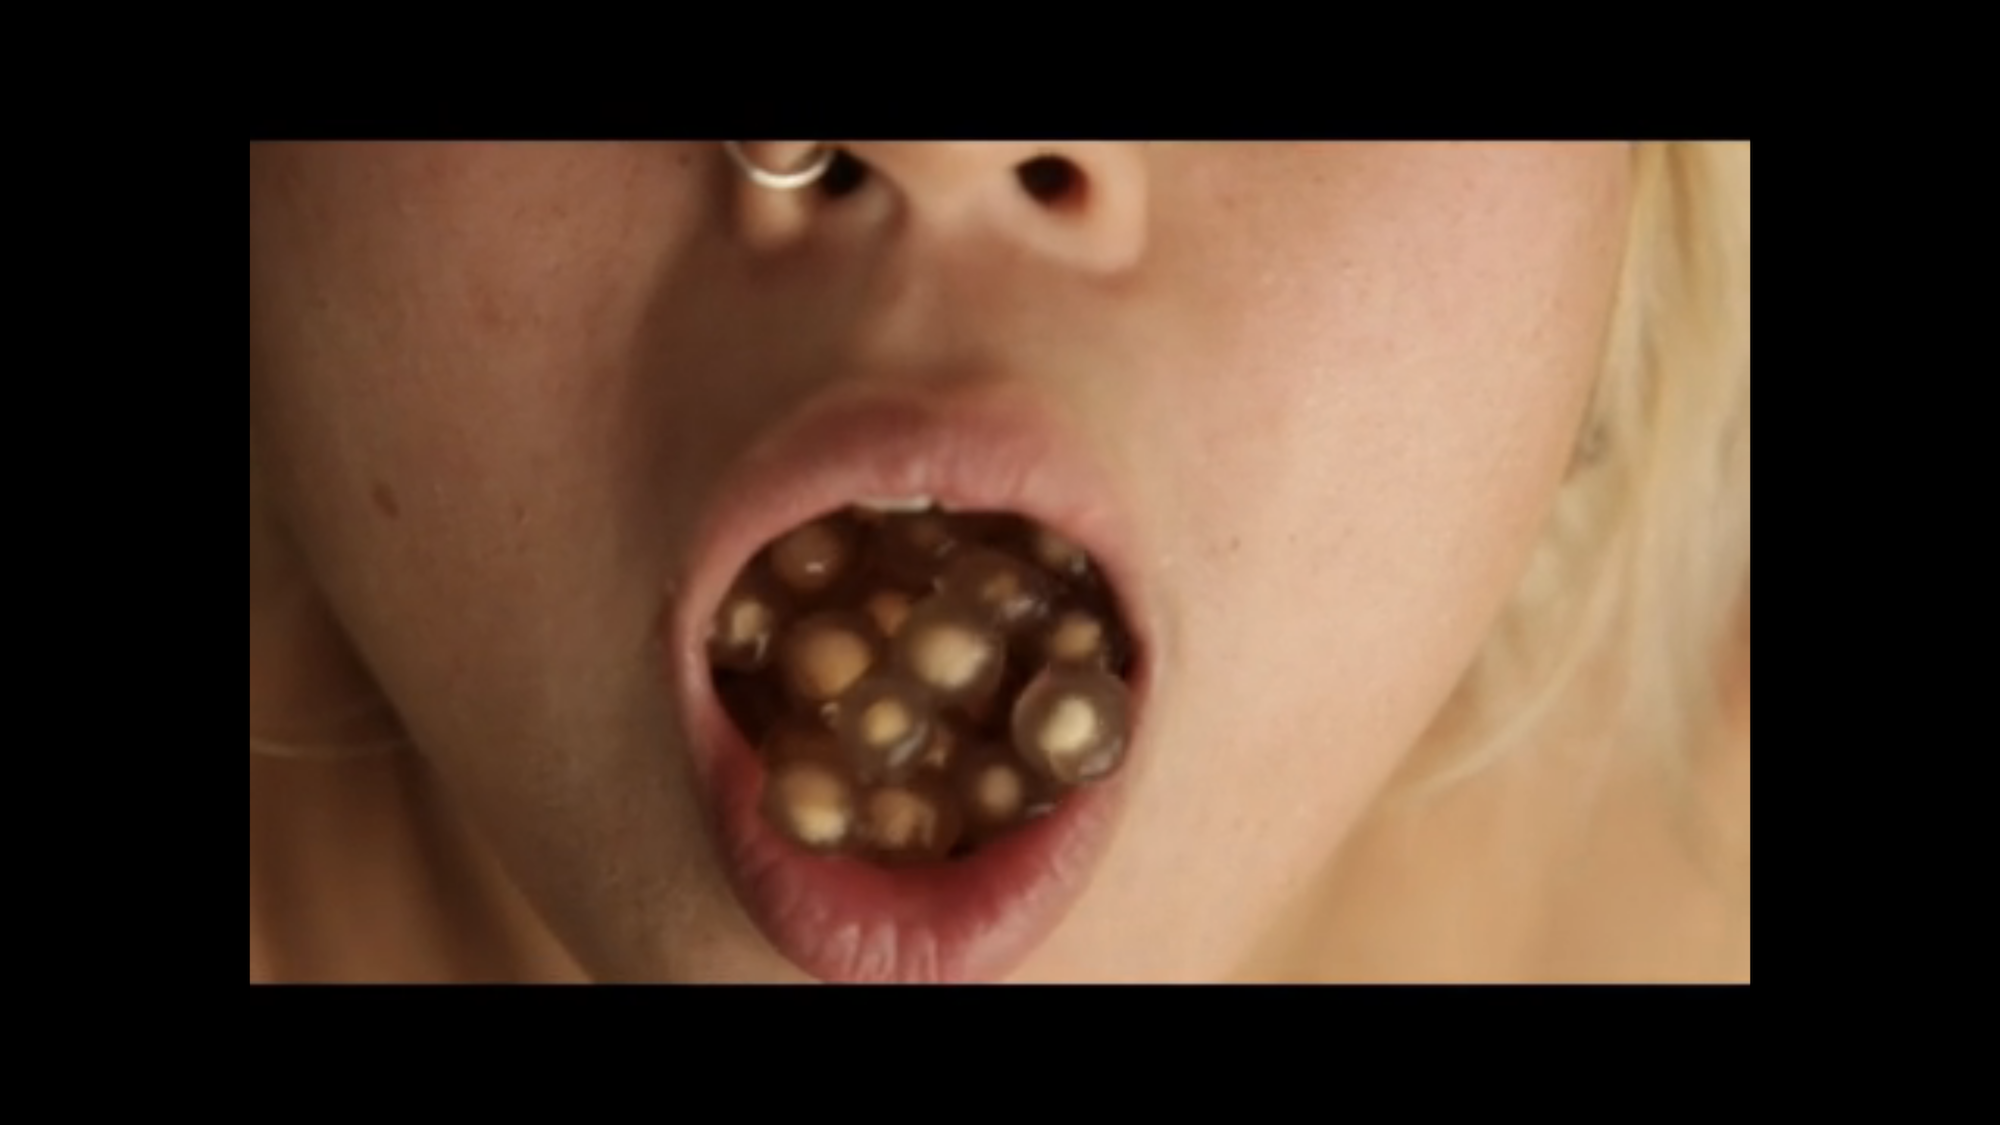 A still from a video depicting the lower half of a person's face, mouth agape filled with translucent tan seeds or tapioca balls.